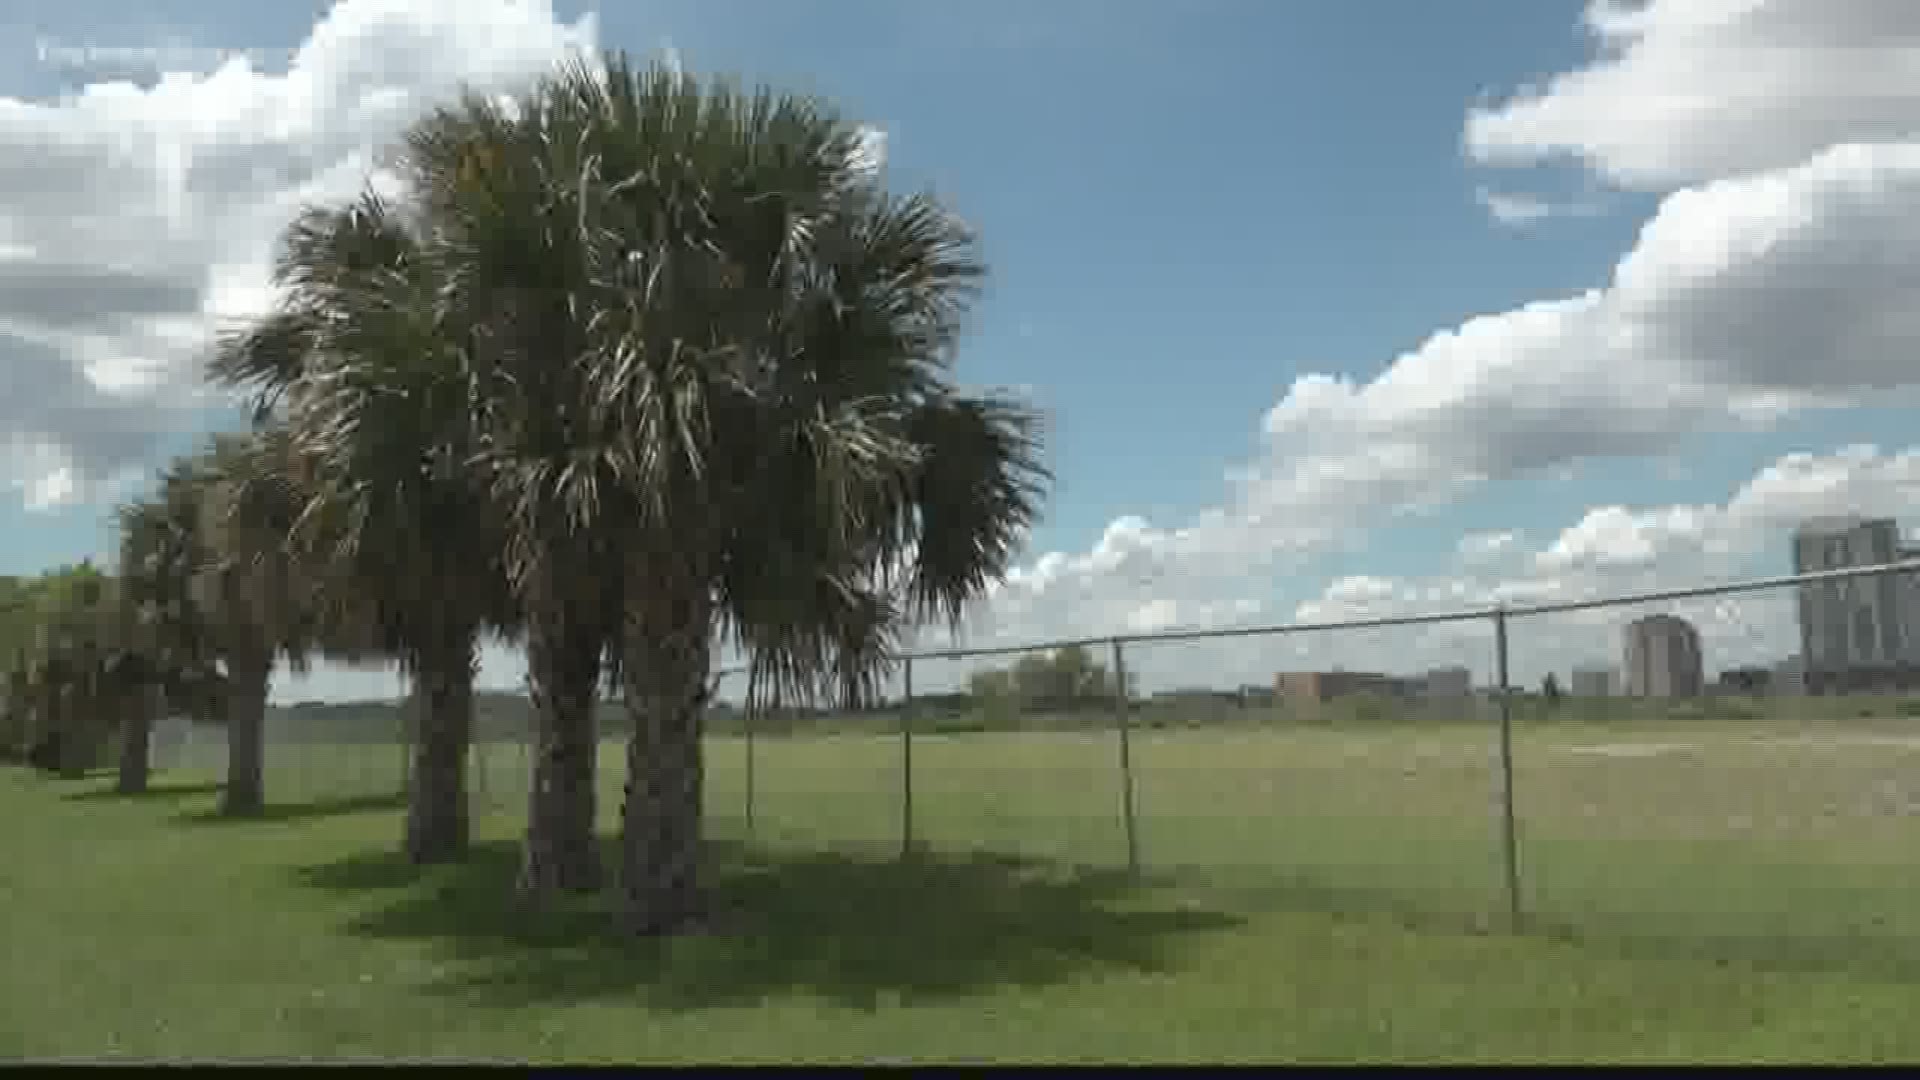 The plant disease, lethal bronzing, is spreading through Florida and killing our iconic palm trees. Because it is growing throughout the Sunshine State, palm trees on the First Coast could be in danger of dying.